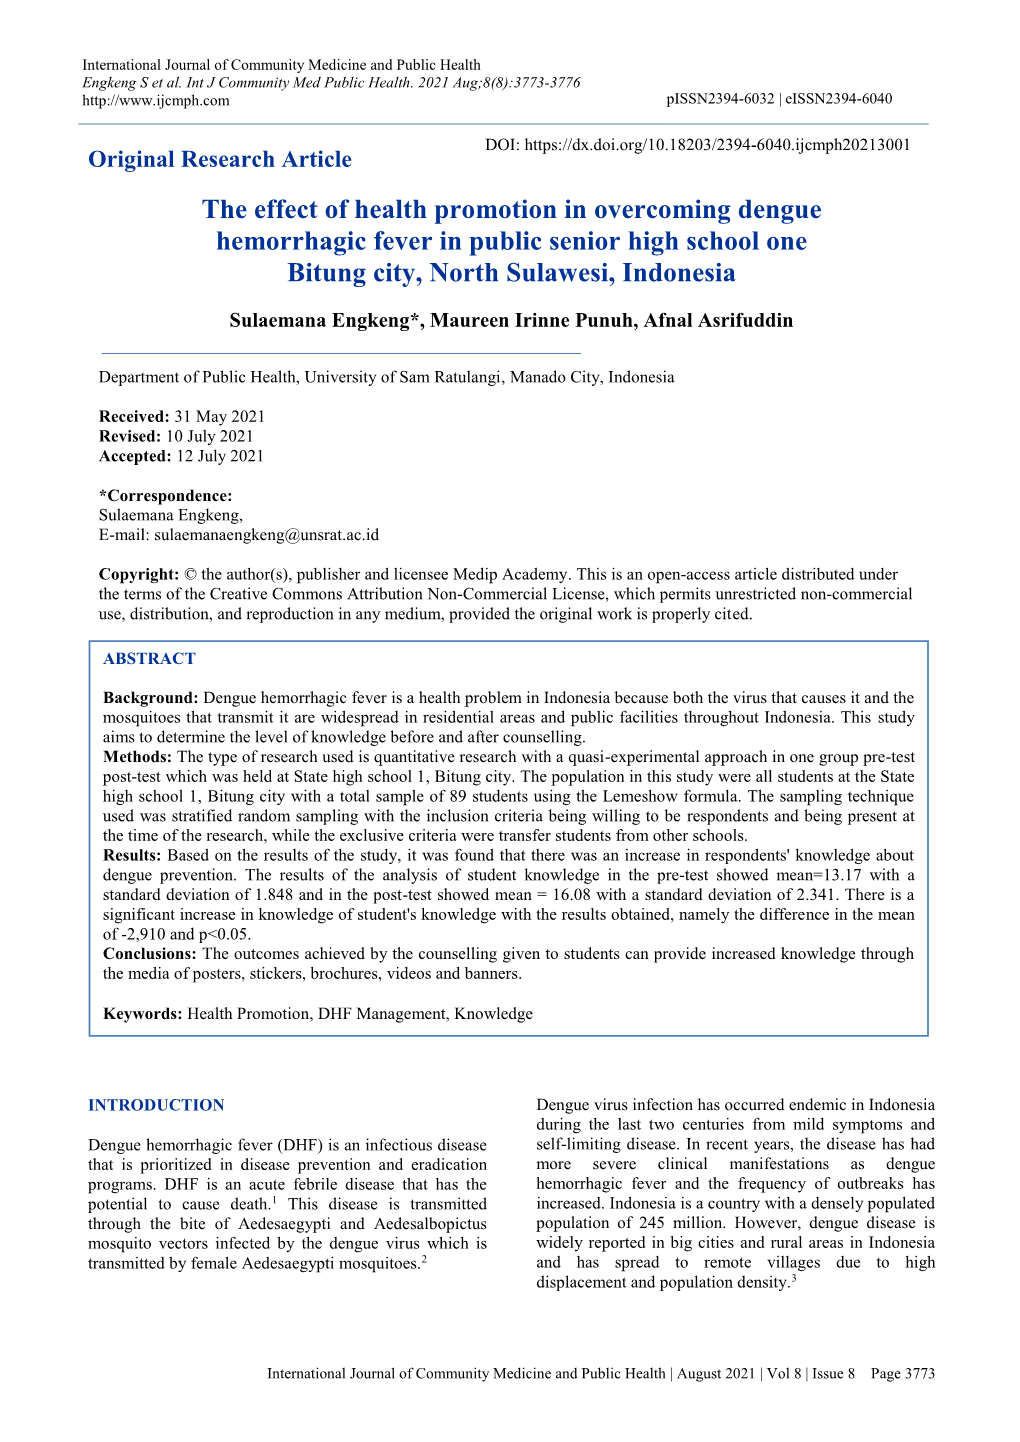 The Effect of Health Promotion in Overcoming Dengue Hemorrhagic Fever in Public Senior High School One Bitung City, North Sulawesi, Indonesia